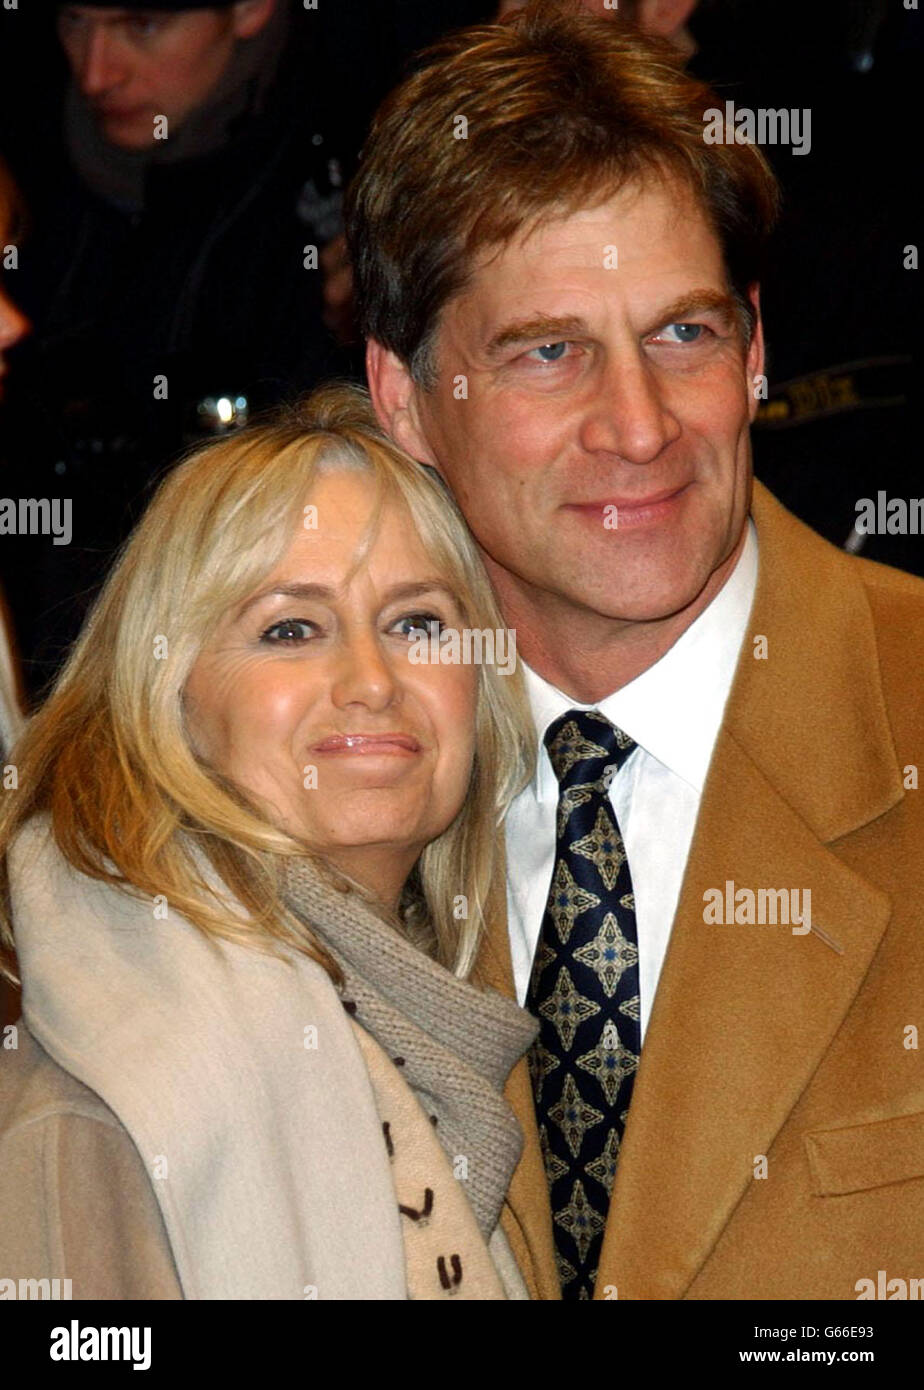 Actor Simon MacCorkindale and actress Susan George arrives for the UK film premiere of Stephen Daldry's 'The Hours' at the Chelsea Cinema in south-west London. Based on the Pulitzer Prize-winning novel by Michael Cunningham. * 'The Hours' stars Nicole Kidman, Julianne Moore and Claire Danes. Stock Photo